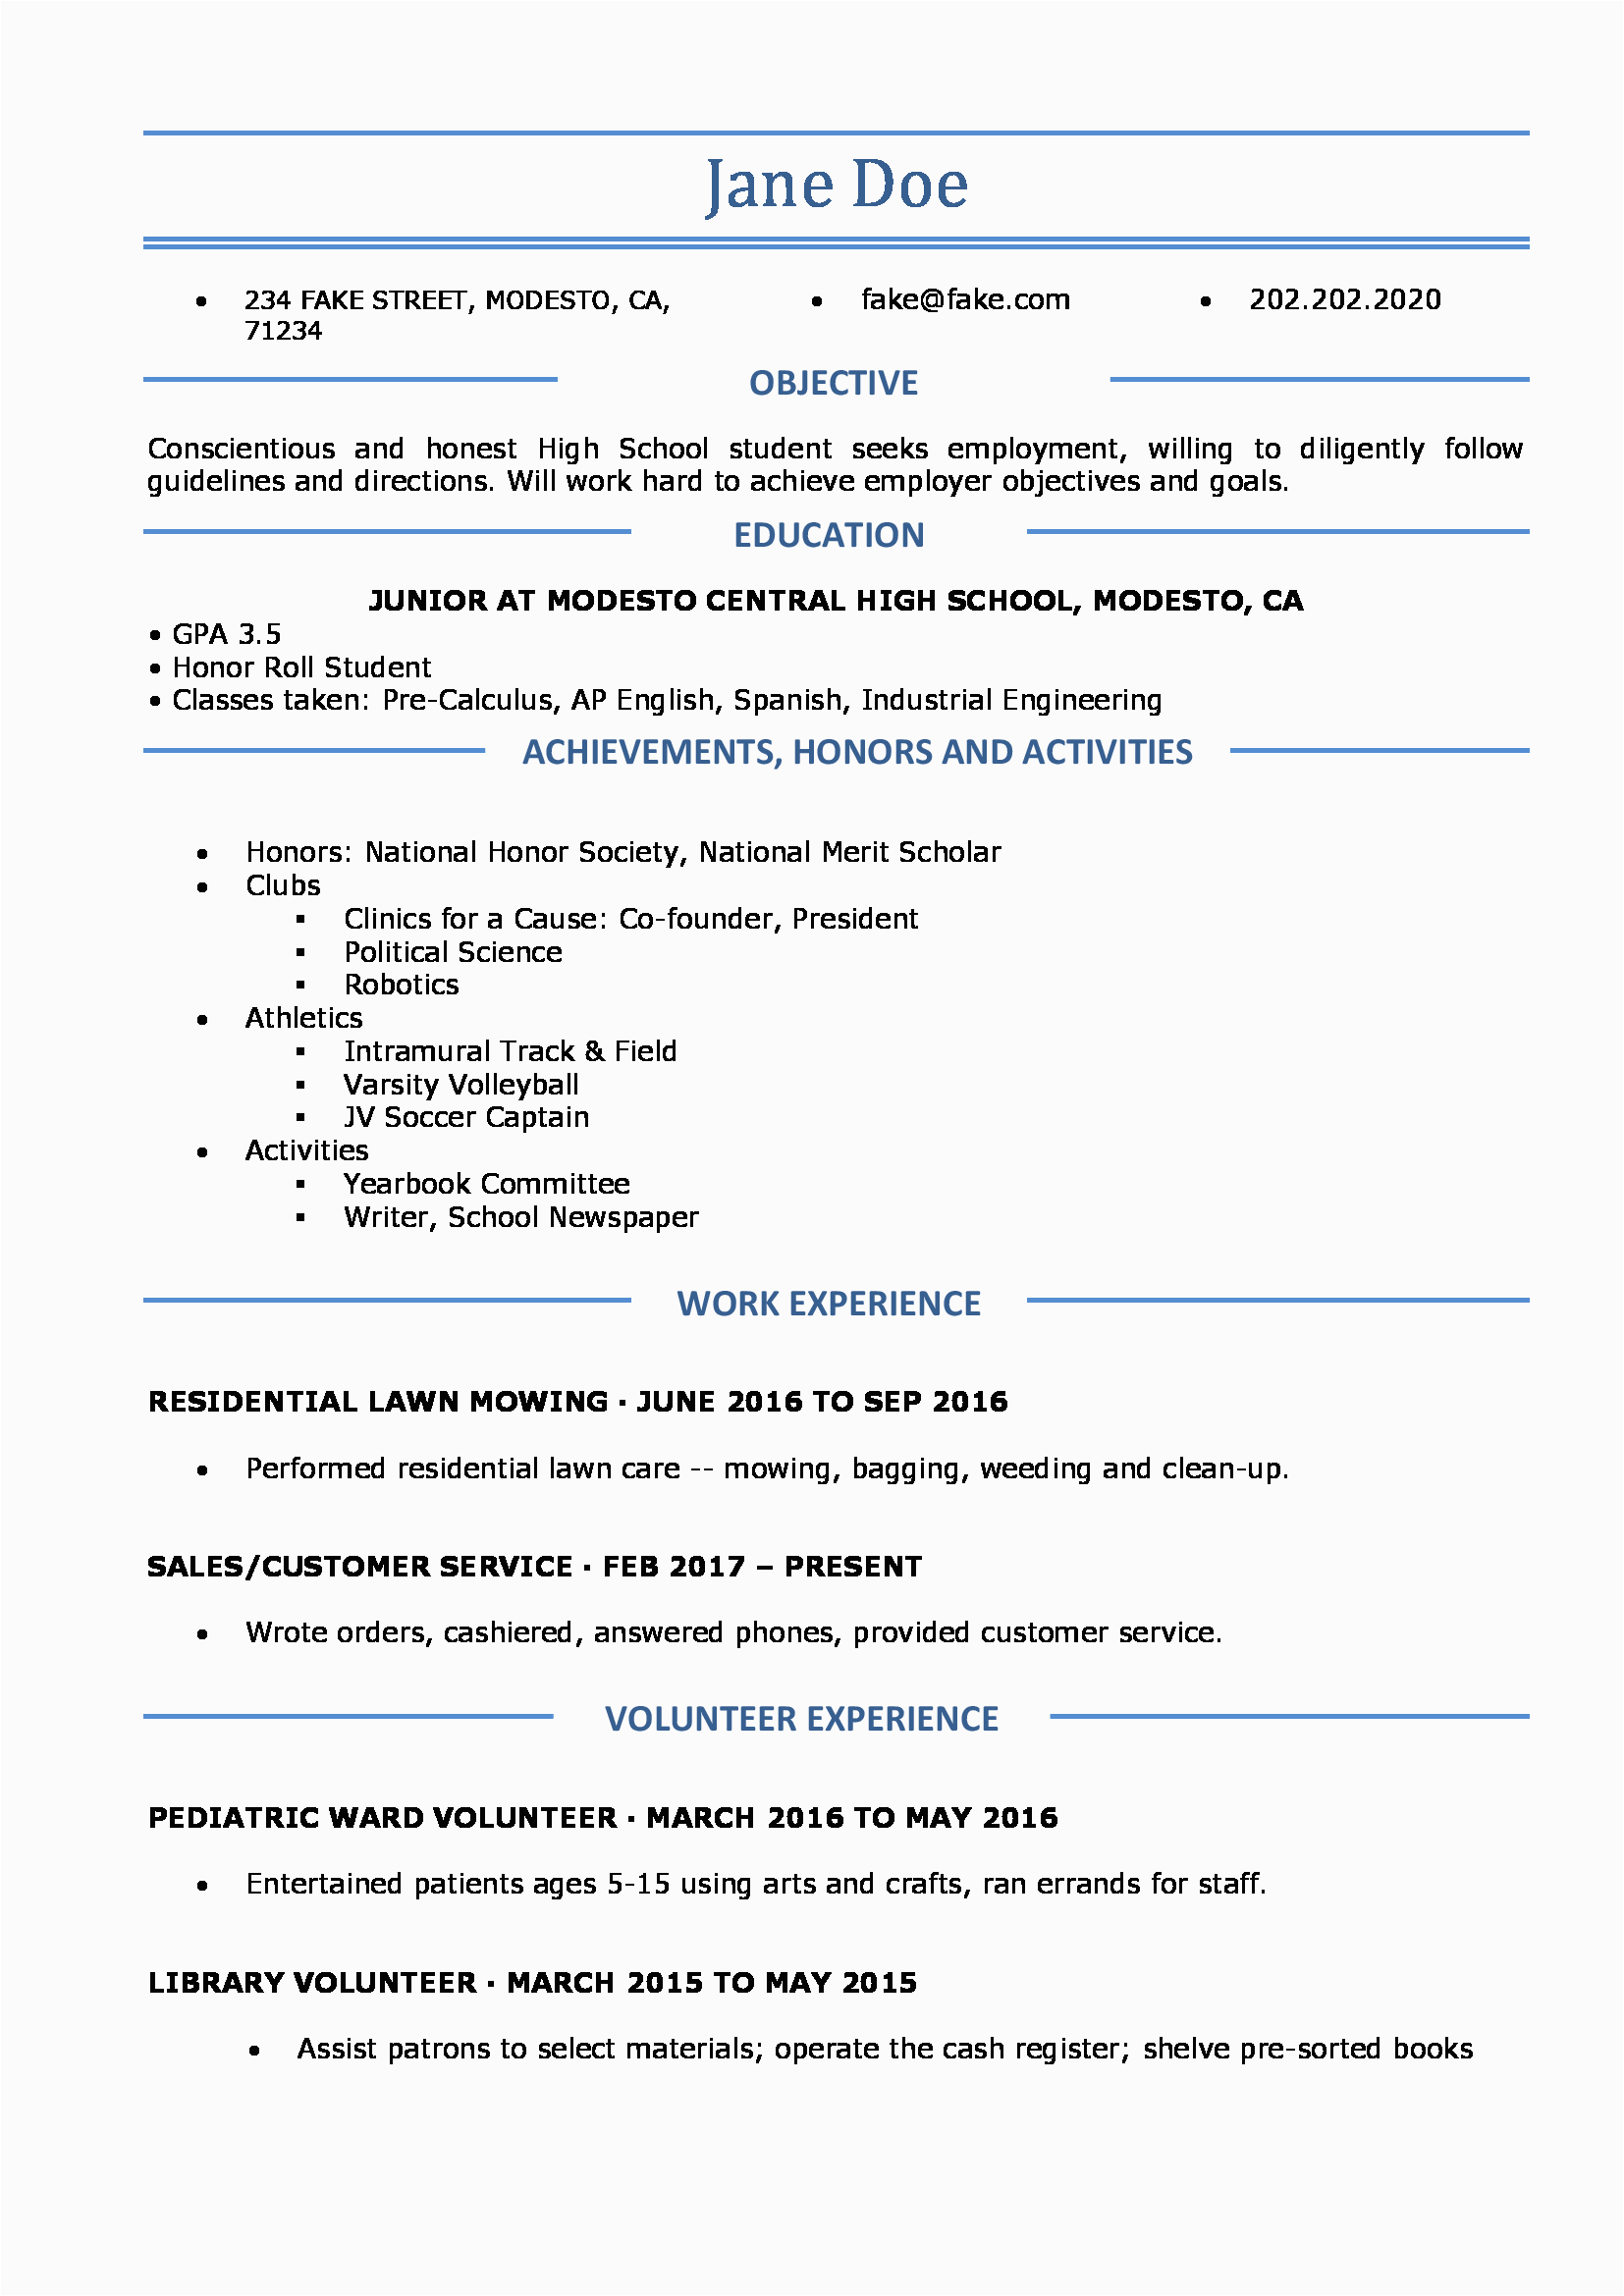 Resume Templates Free for High School Students High School Resume Resume Templates for High School